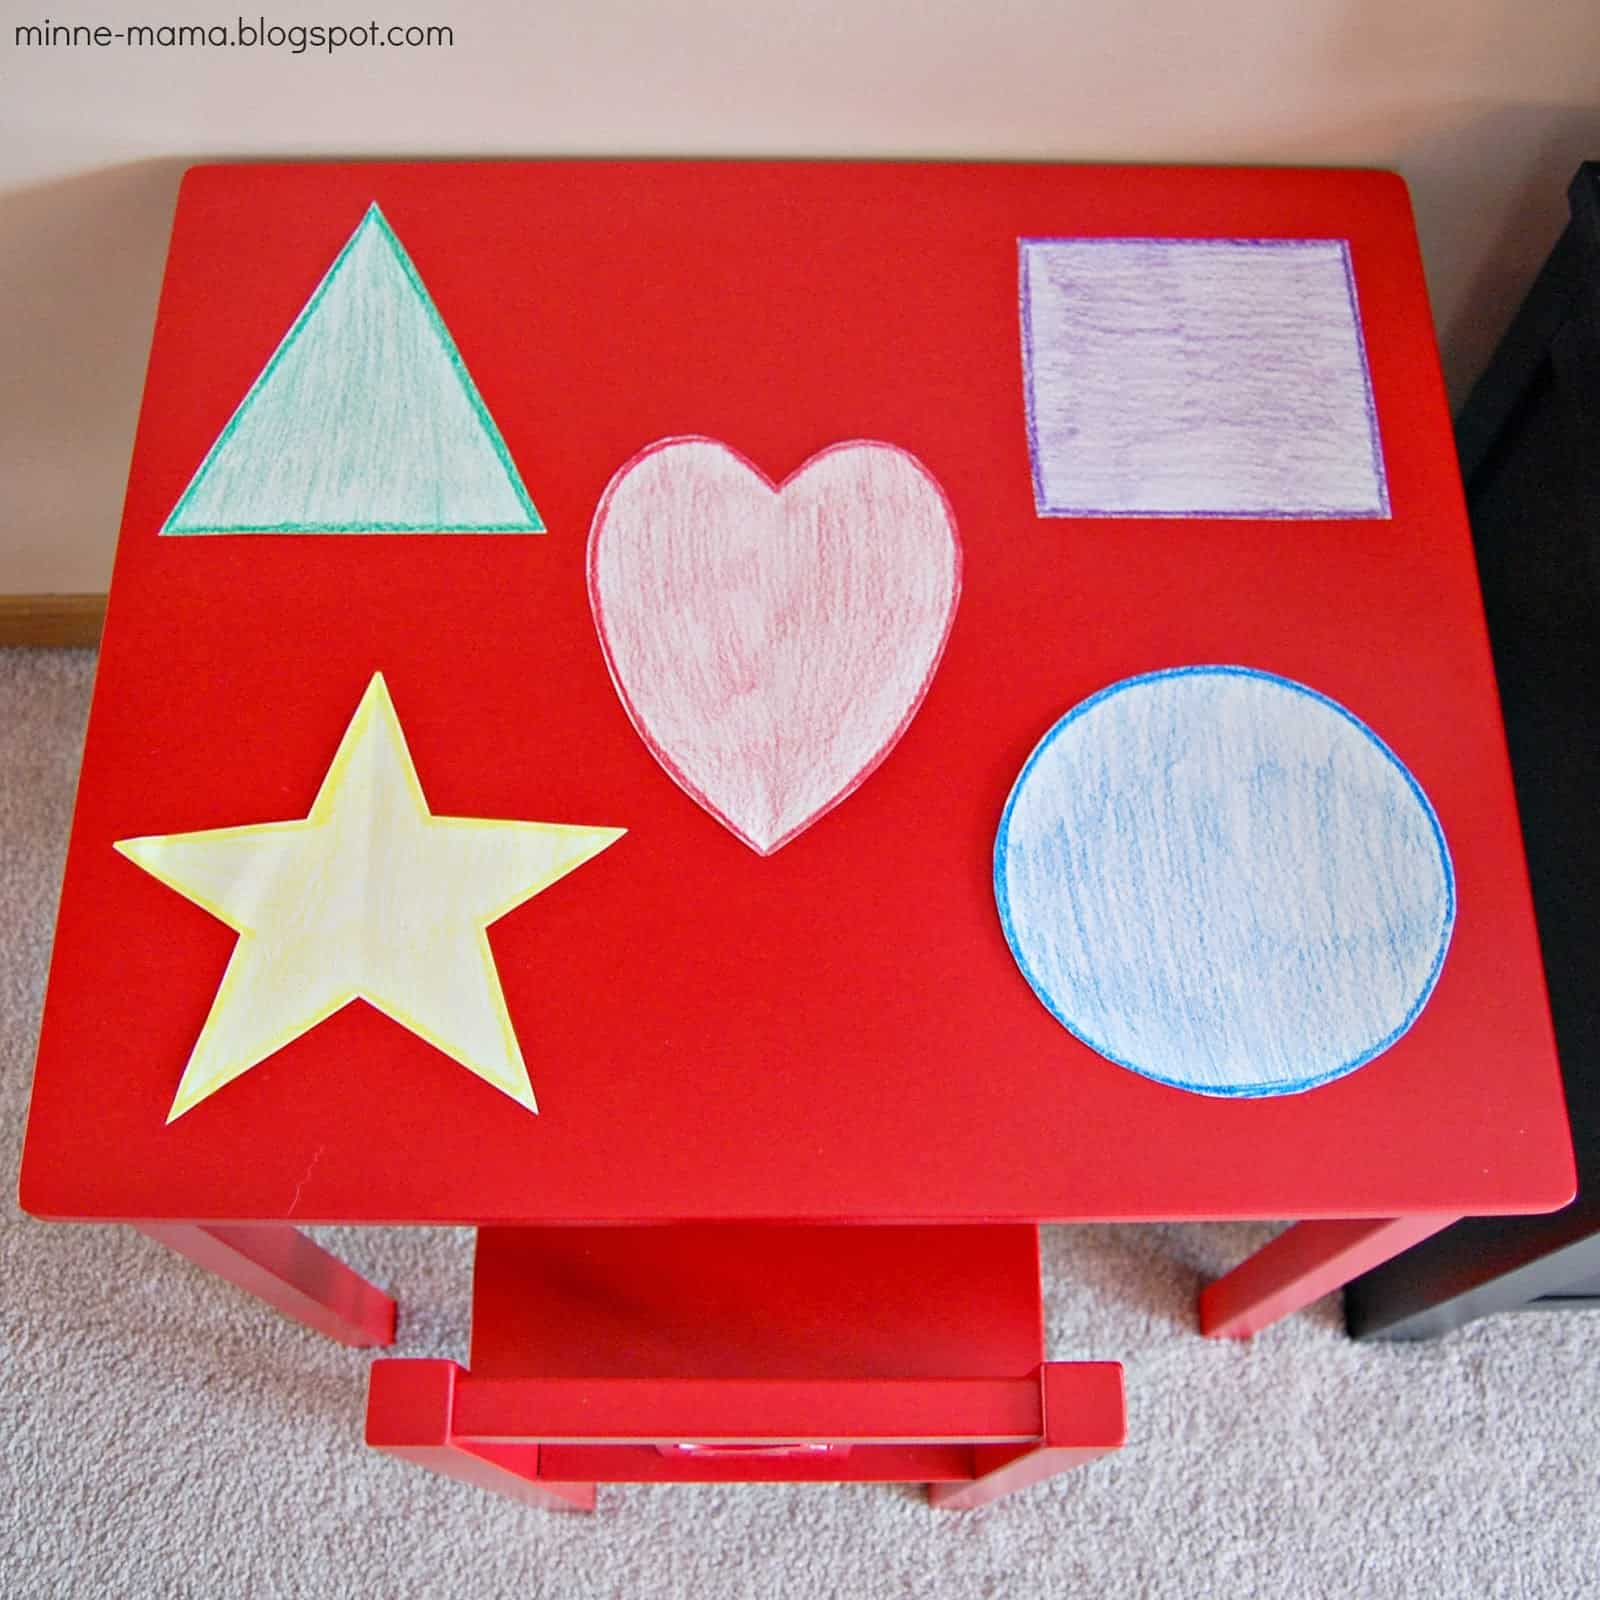 red table with shape pictures